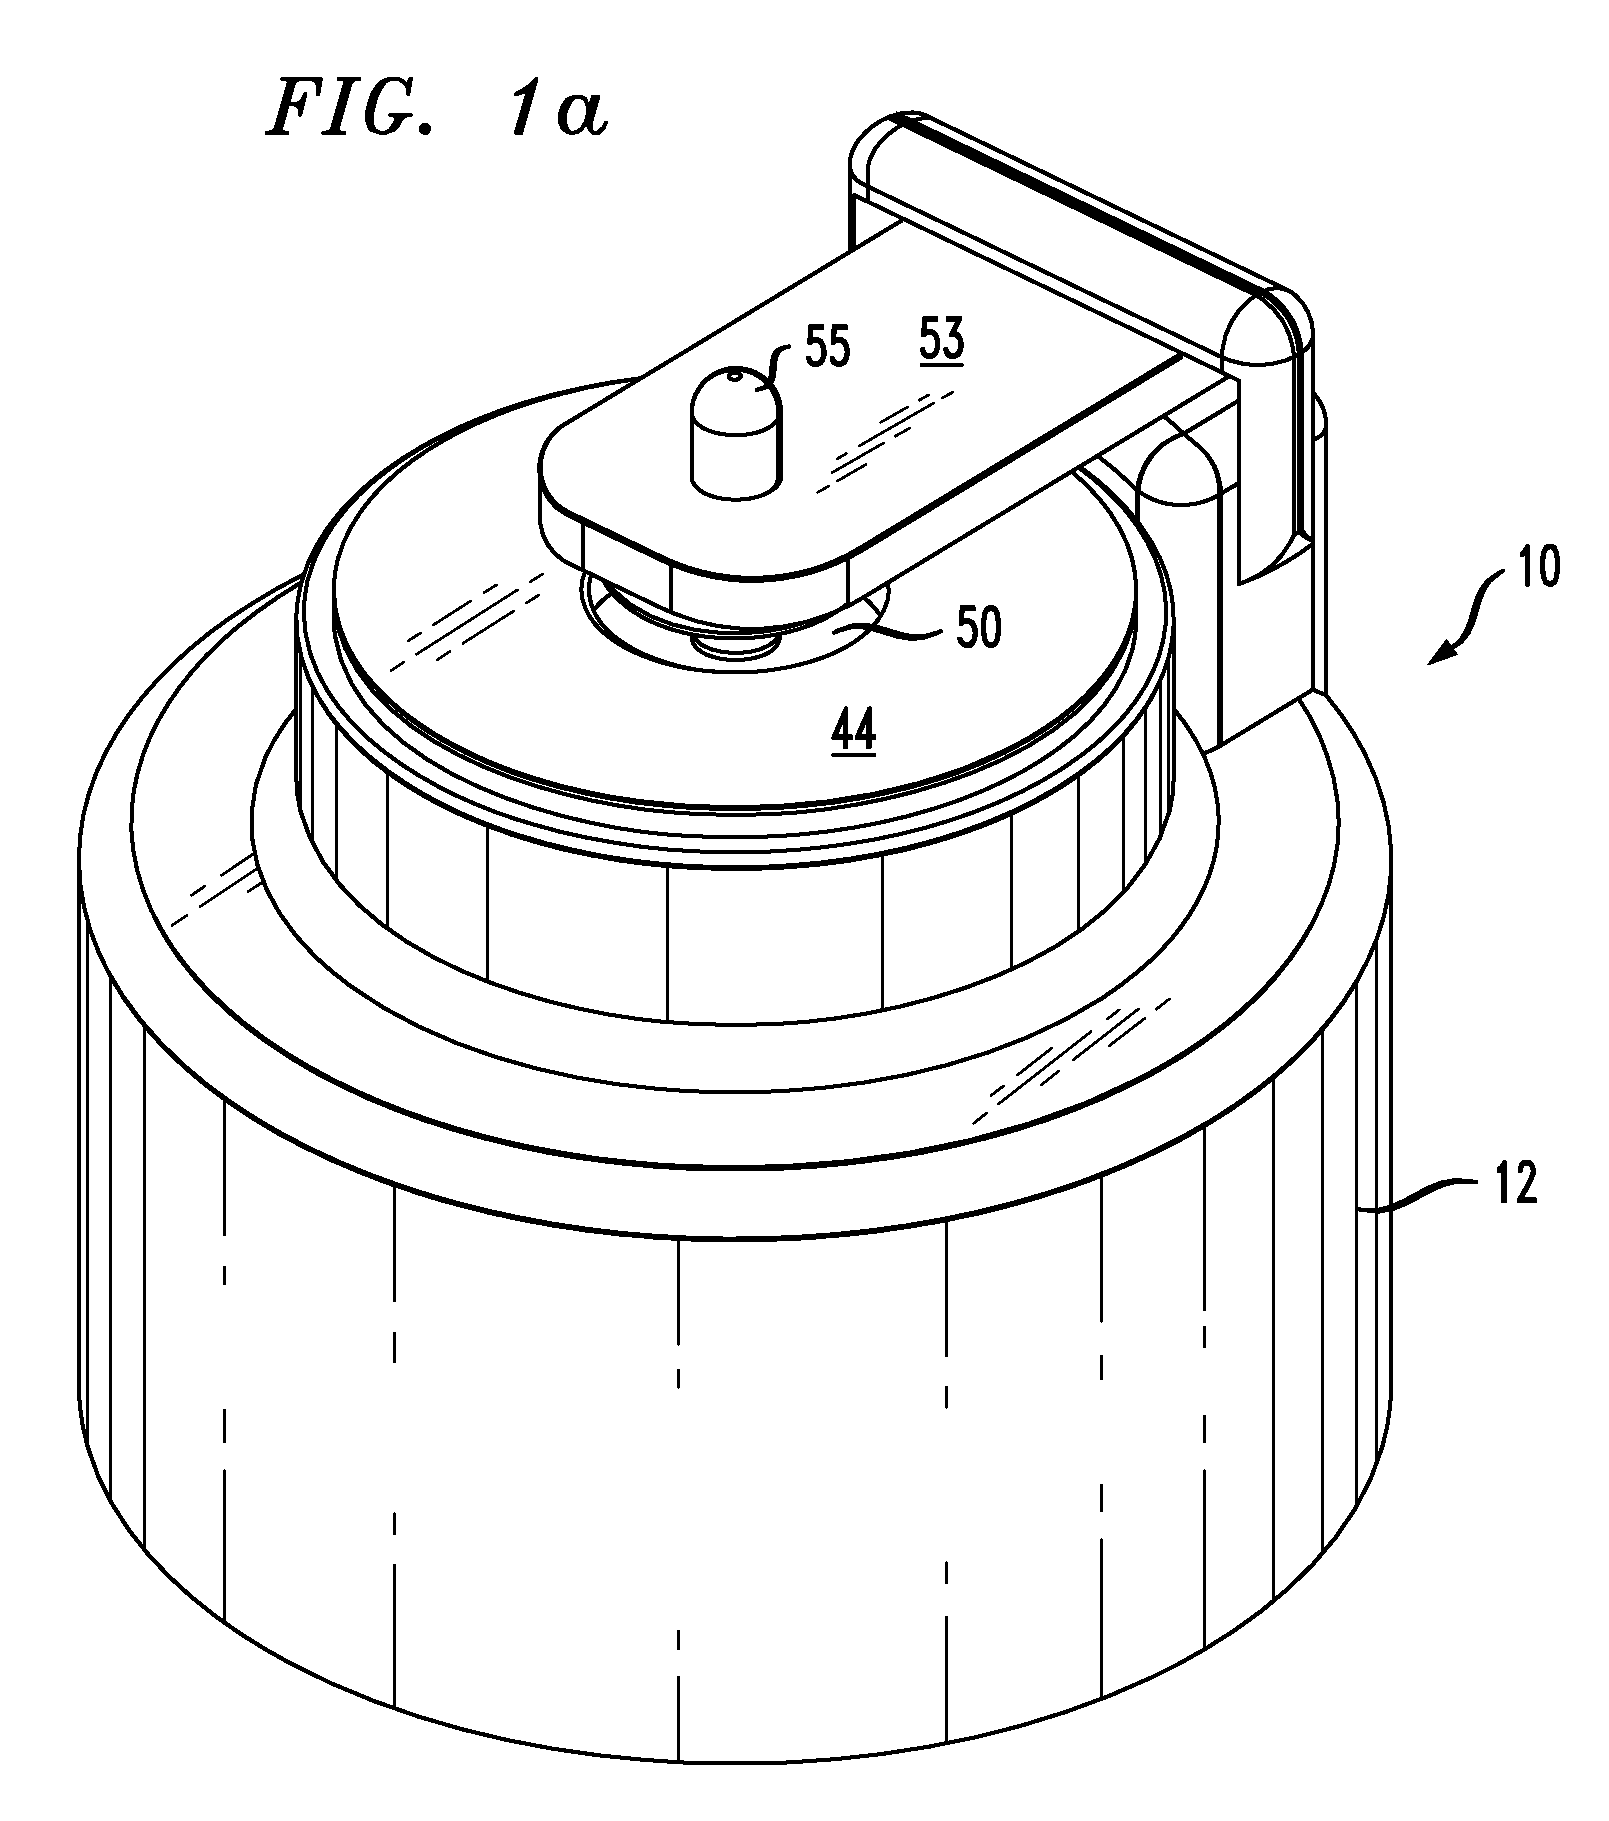 Flow rate accuracy of a fluidic delivery system